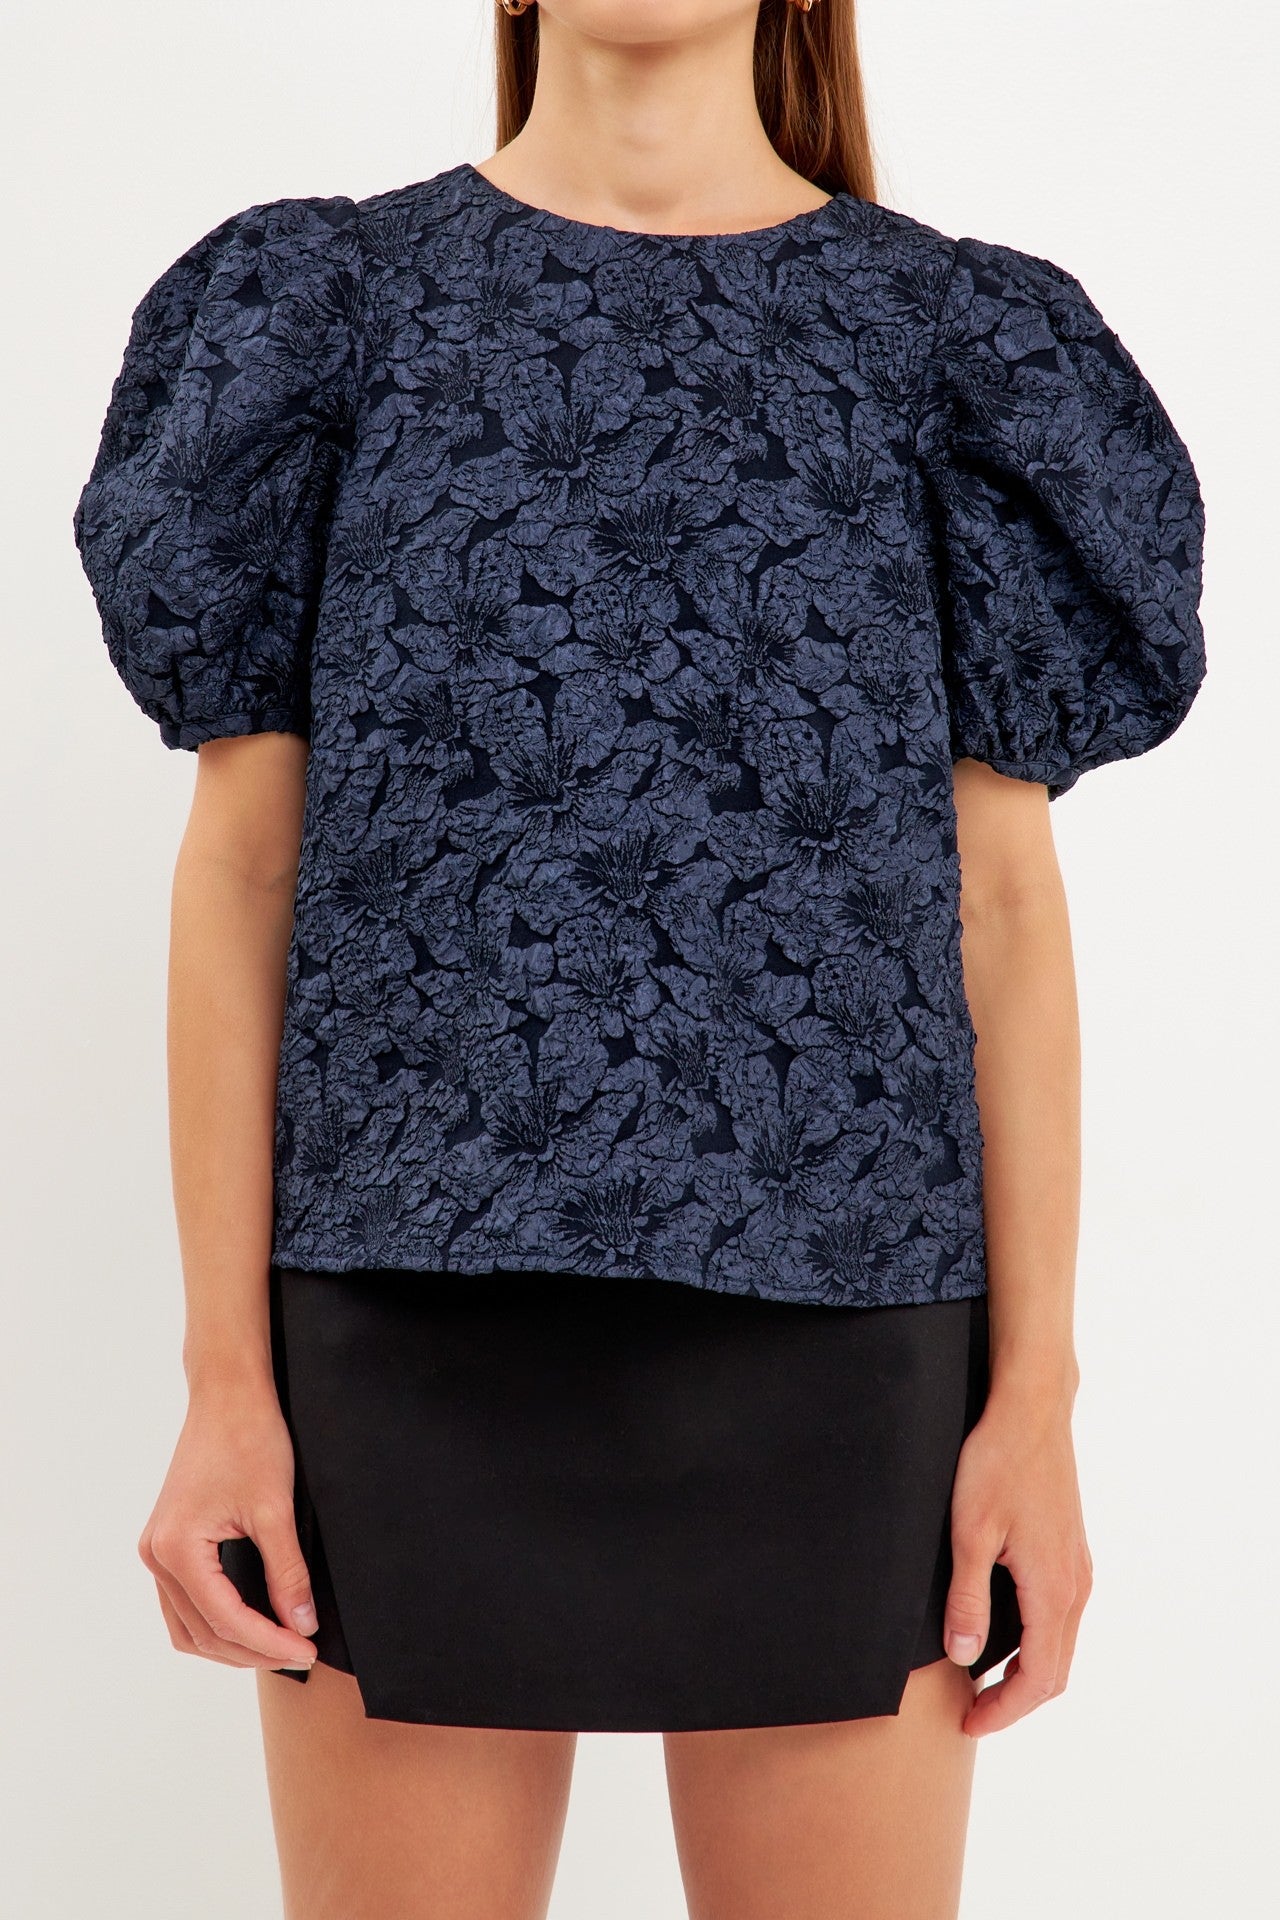 Apparel- Endless Rose Texture Fabric Top with Puff Short Sleeves